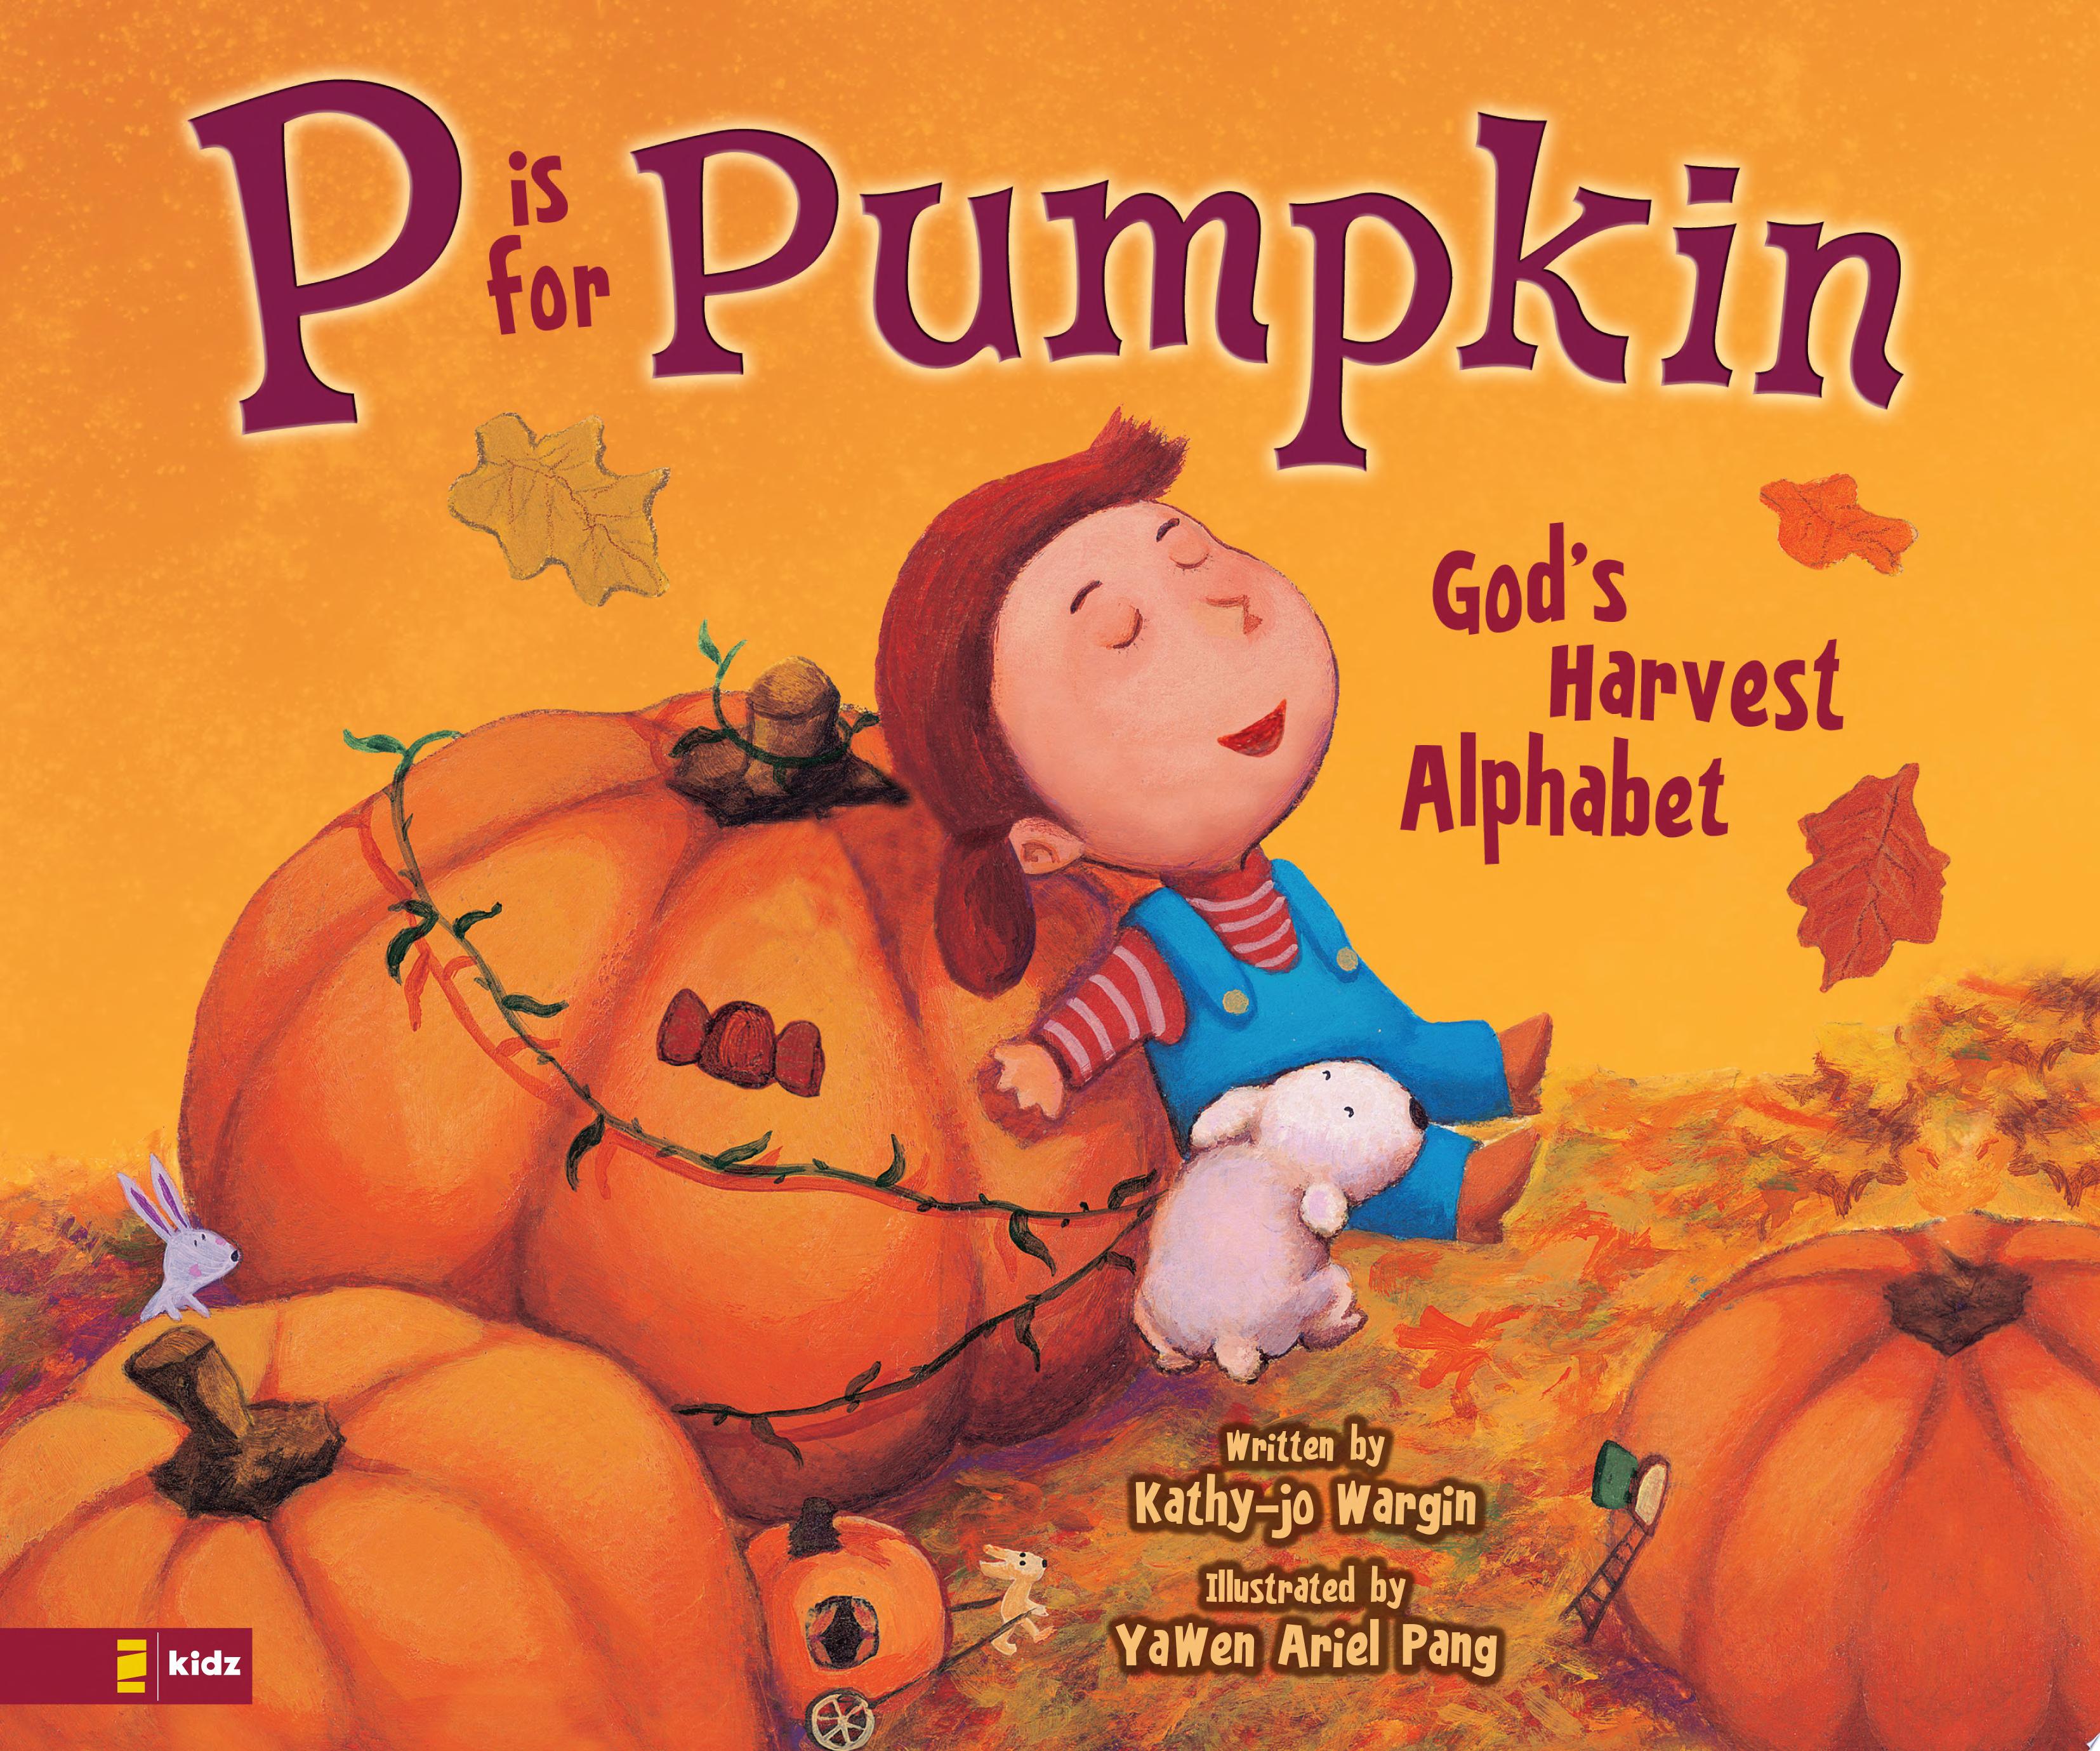 Image for "P Is for Pumpkin"